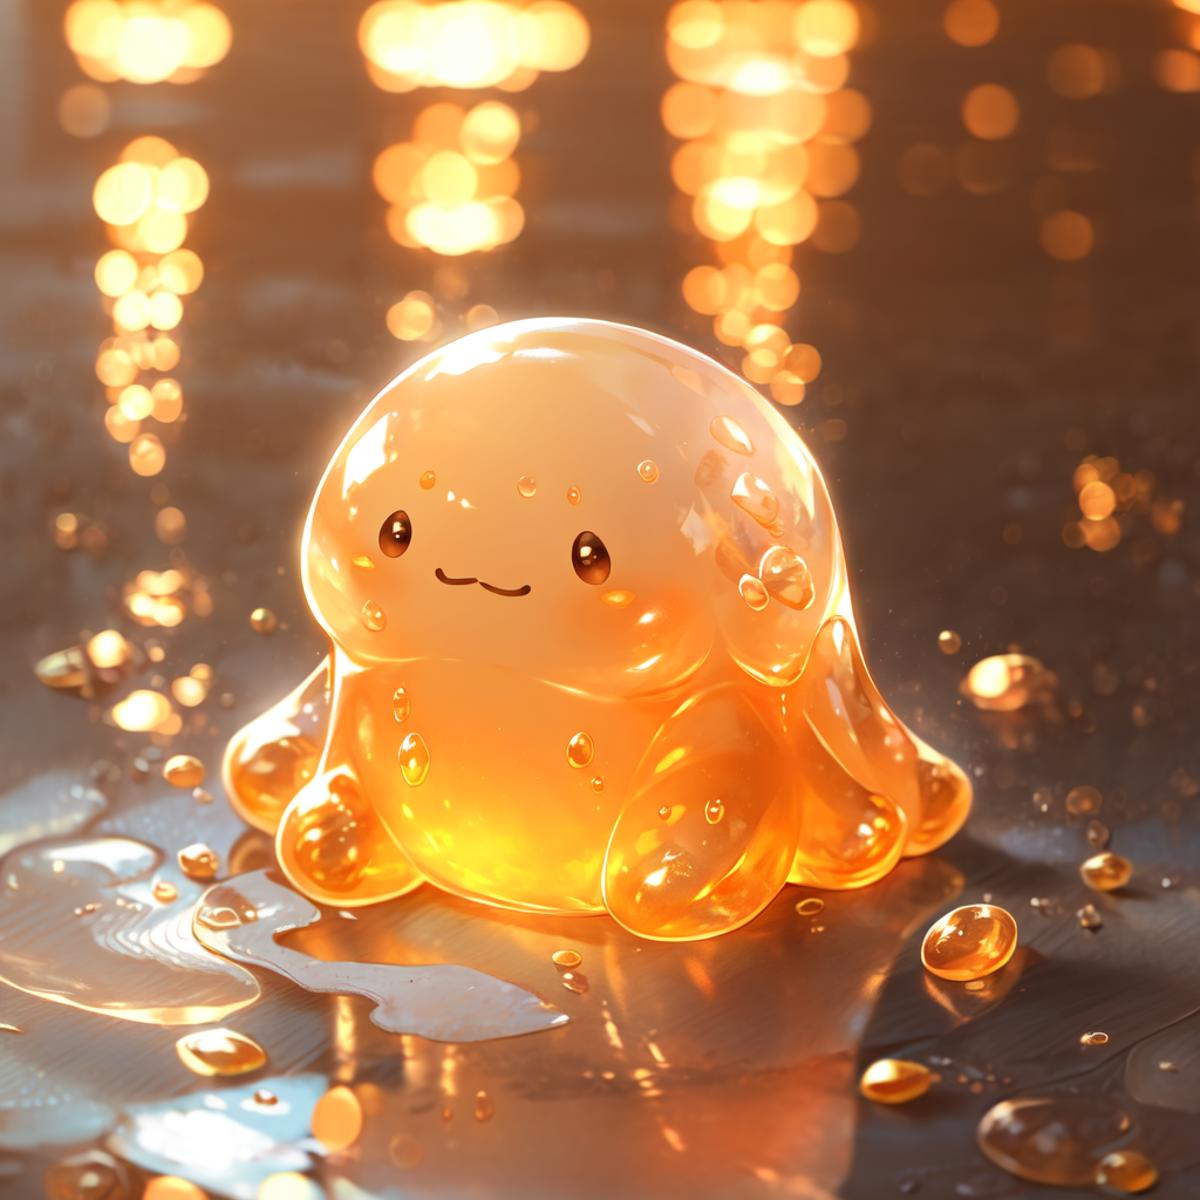 A cute, smiling, yellow, and orange cartoon character with a sad face, possibly a jellyfish or a blob of goo, sits on a wet surface with yellow droplets surrounding it.